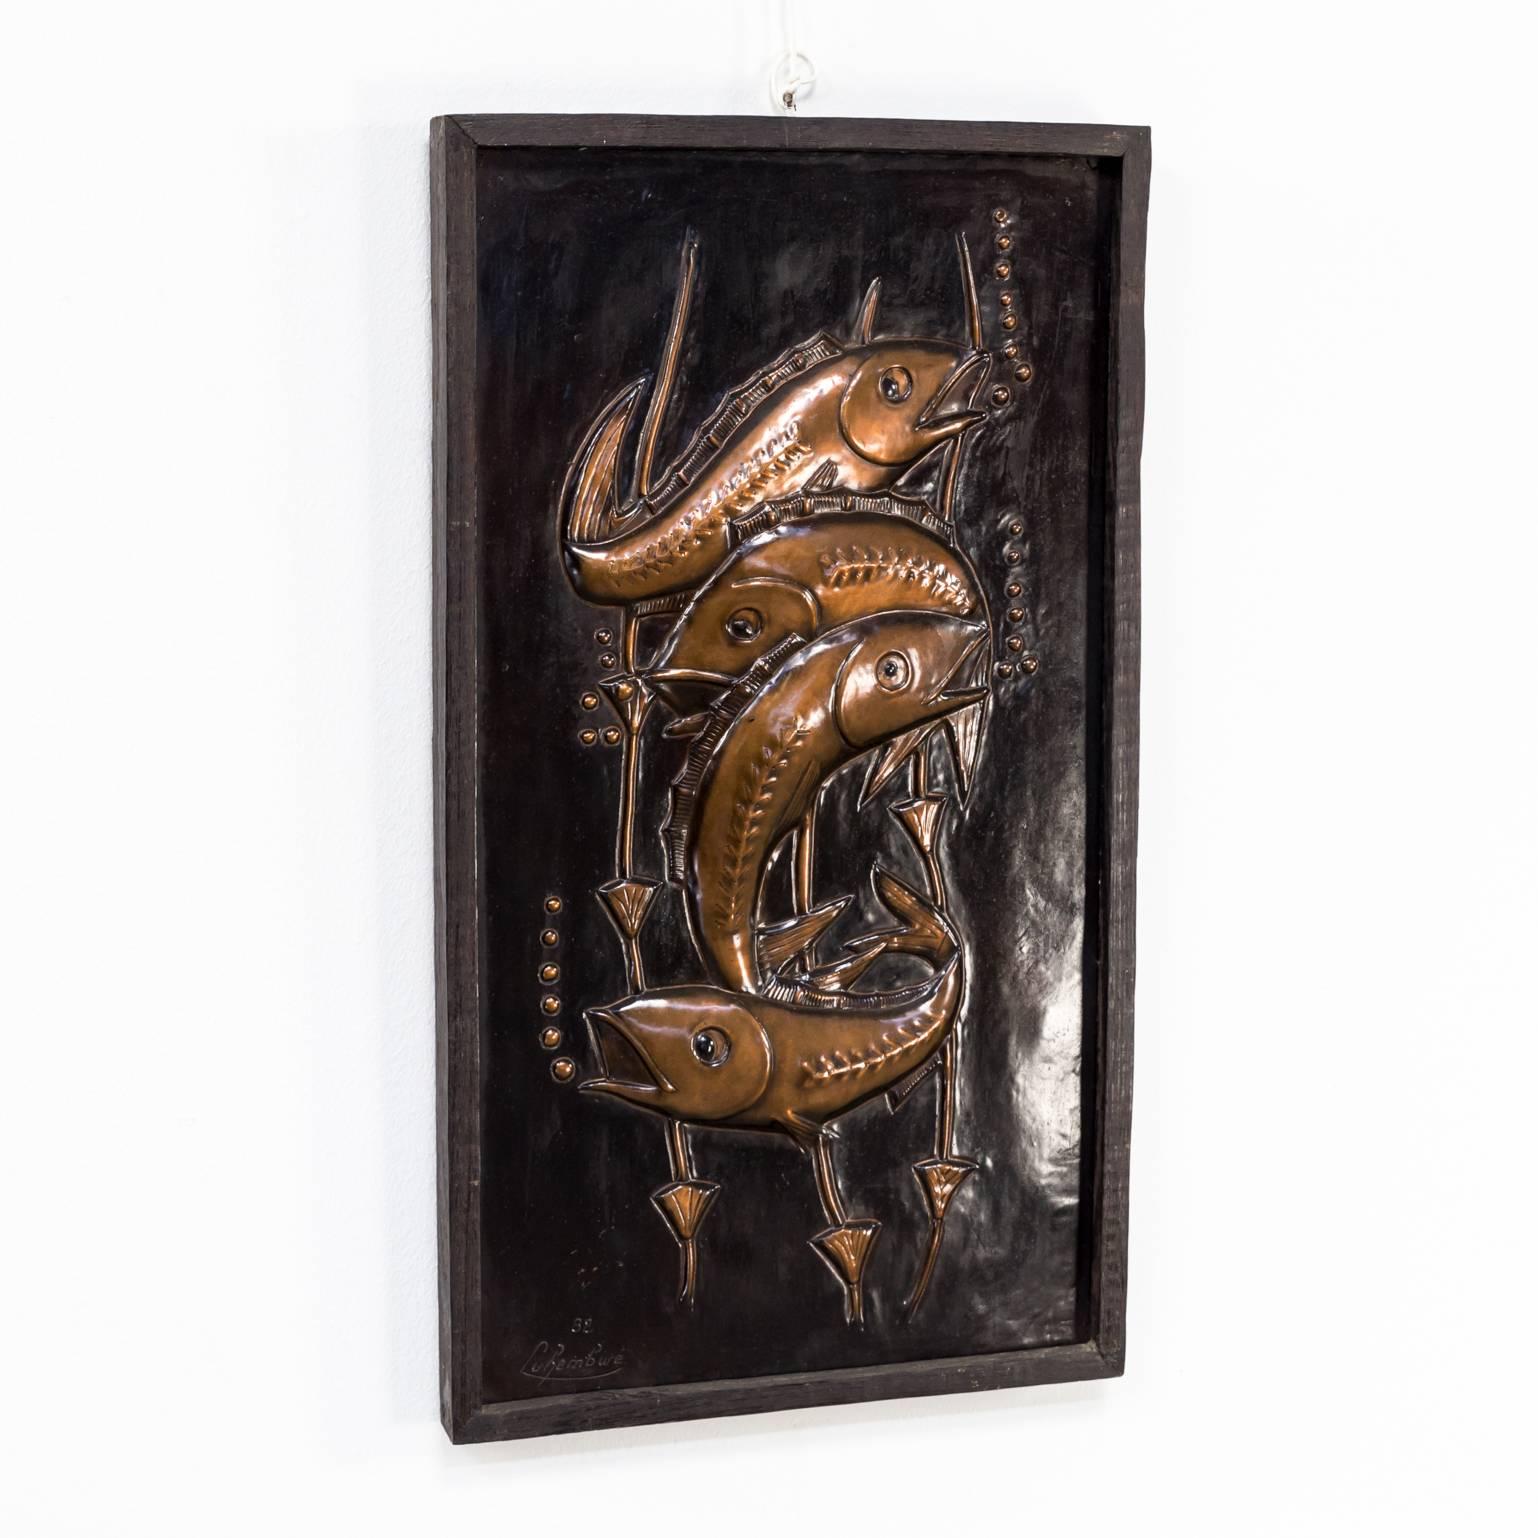 Mixed metals brutalist wall decoration sculpture ‘fish’ in good condition.